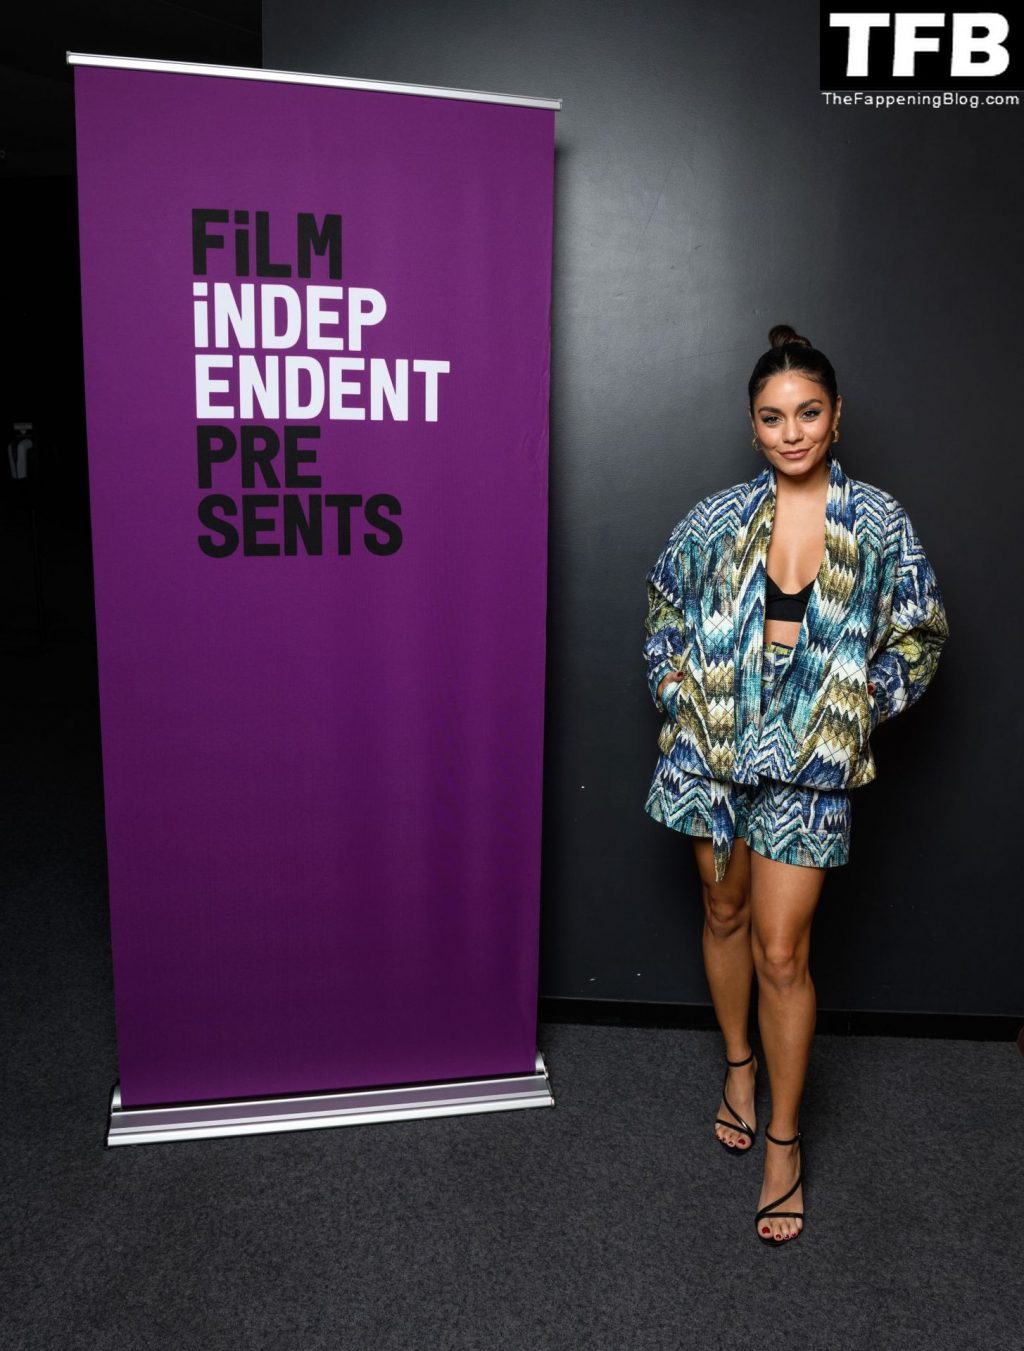 Vanessa Hudgens Flashes Her Sexy Legs at the Film Independent Screening of “Tick, Tick… Boom!” at The Landmark in LA (24 Photos)